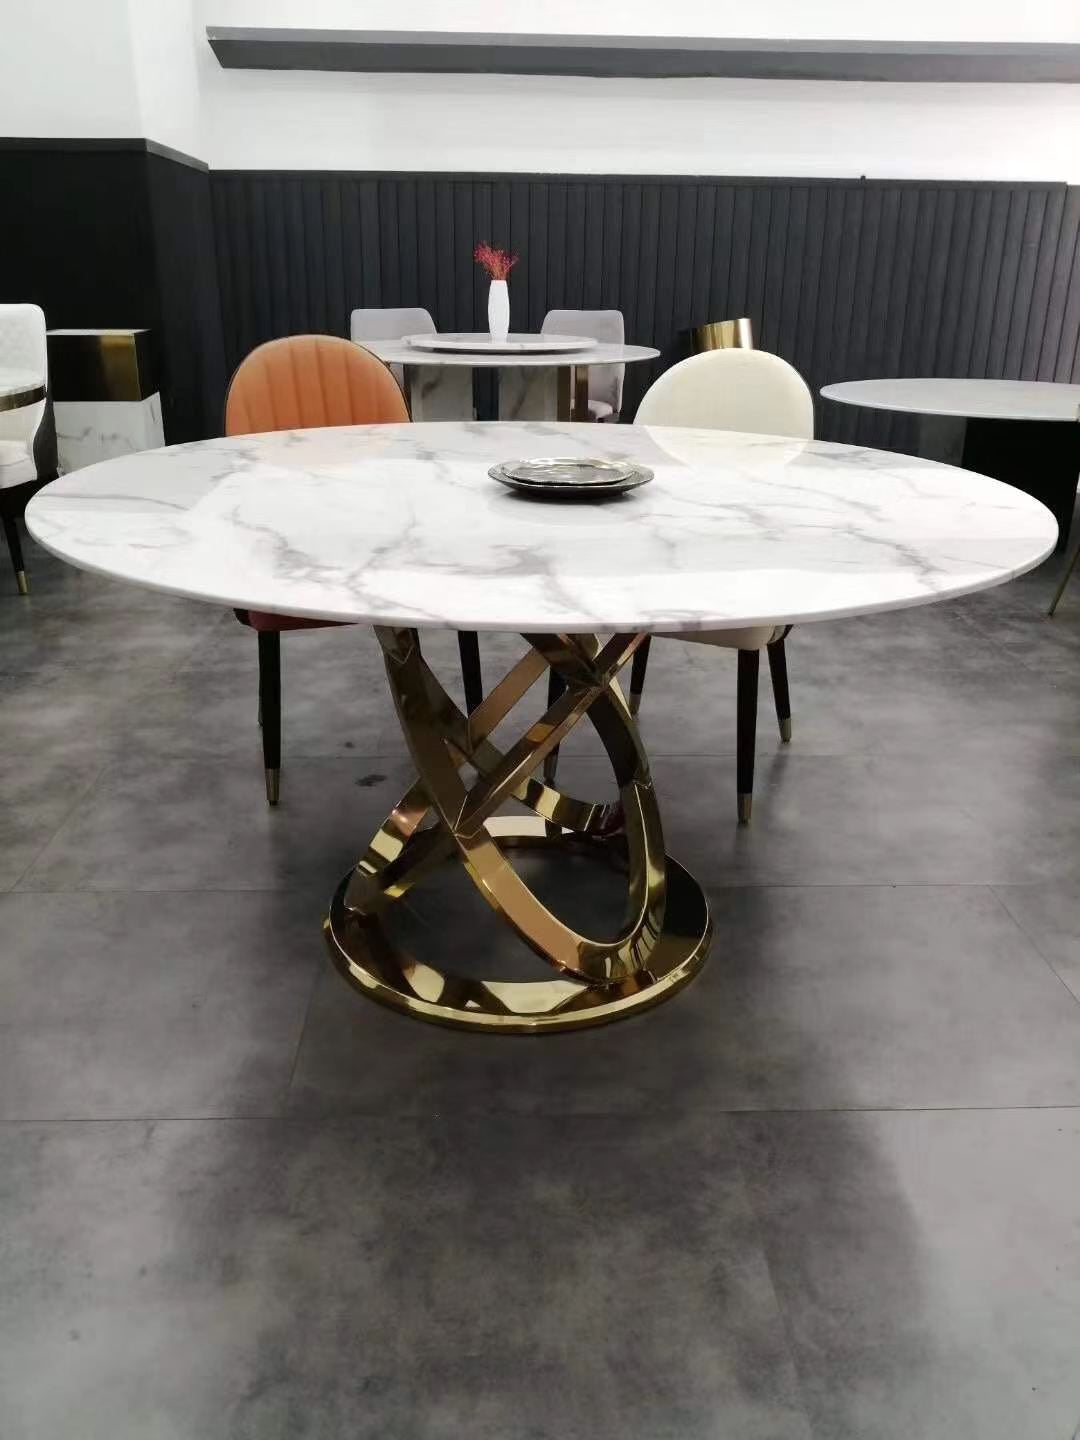 Contemporary 2021 Italy Luxury design Marble Dining Table Round Table with chrome / gold stainless steel base